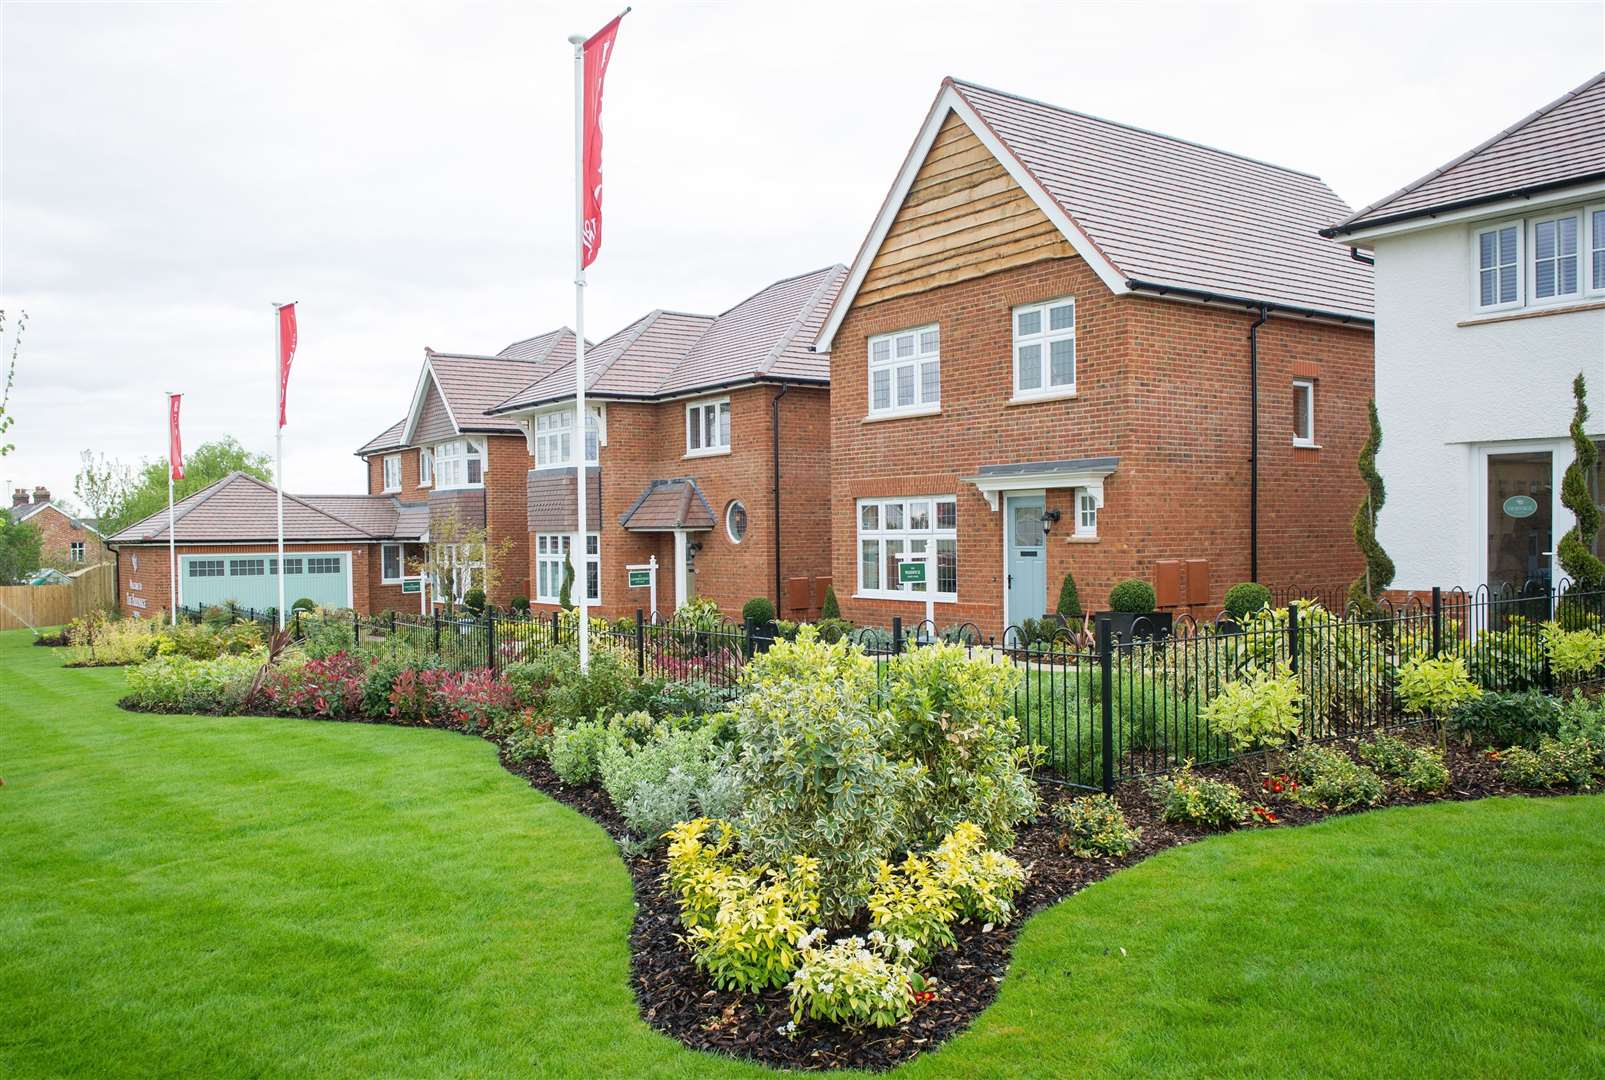 Many new homes have already been built - like these at The Parsonage in Marden